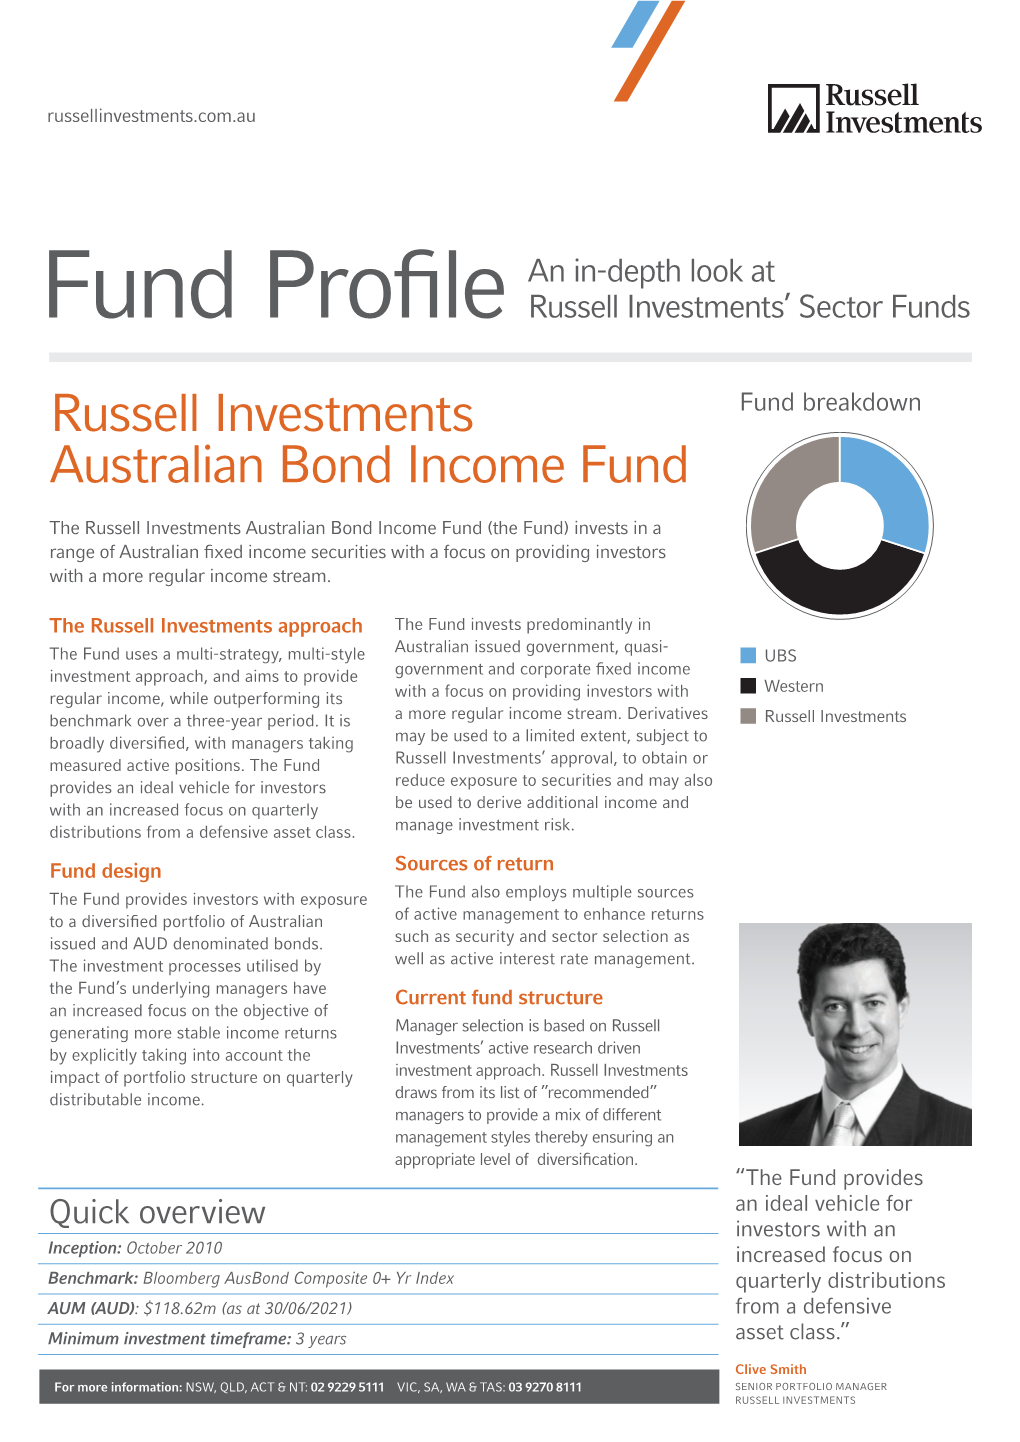 Russell Investments Australian Bond Income Fund